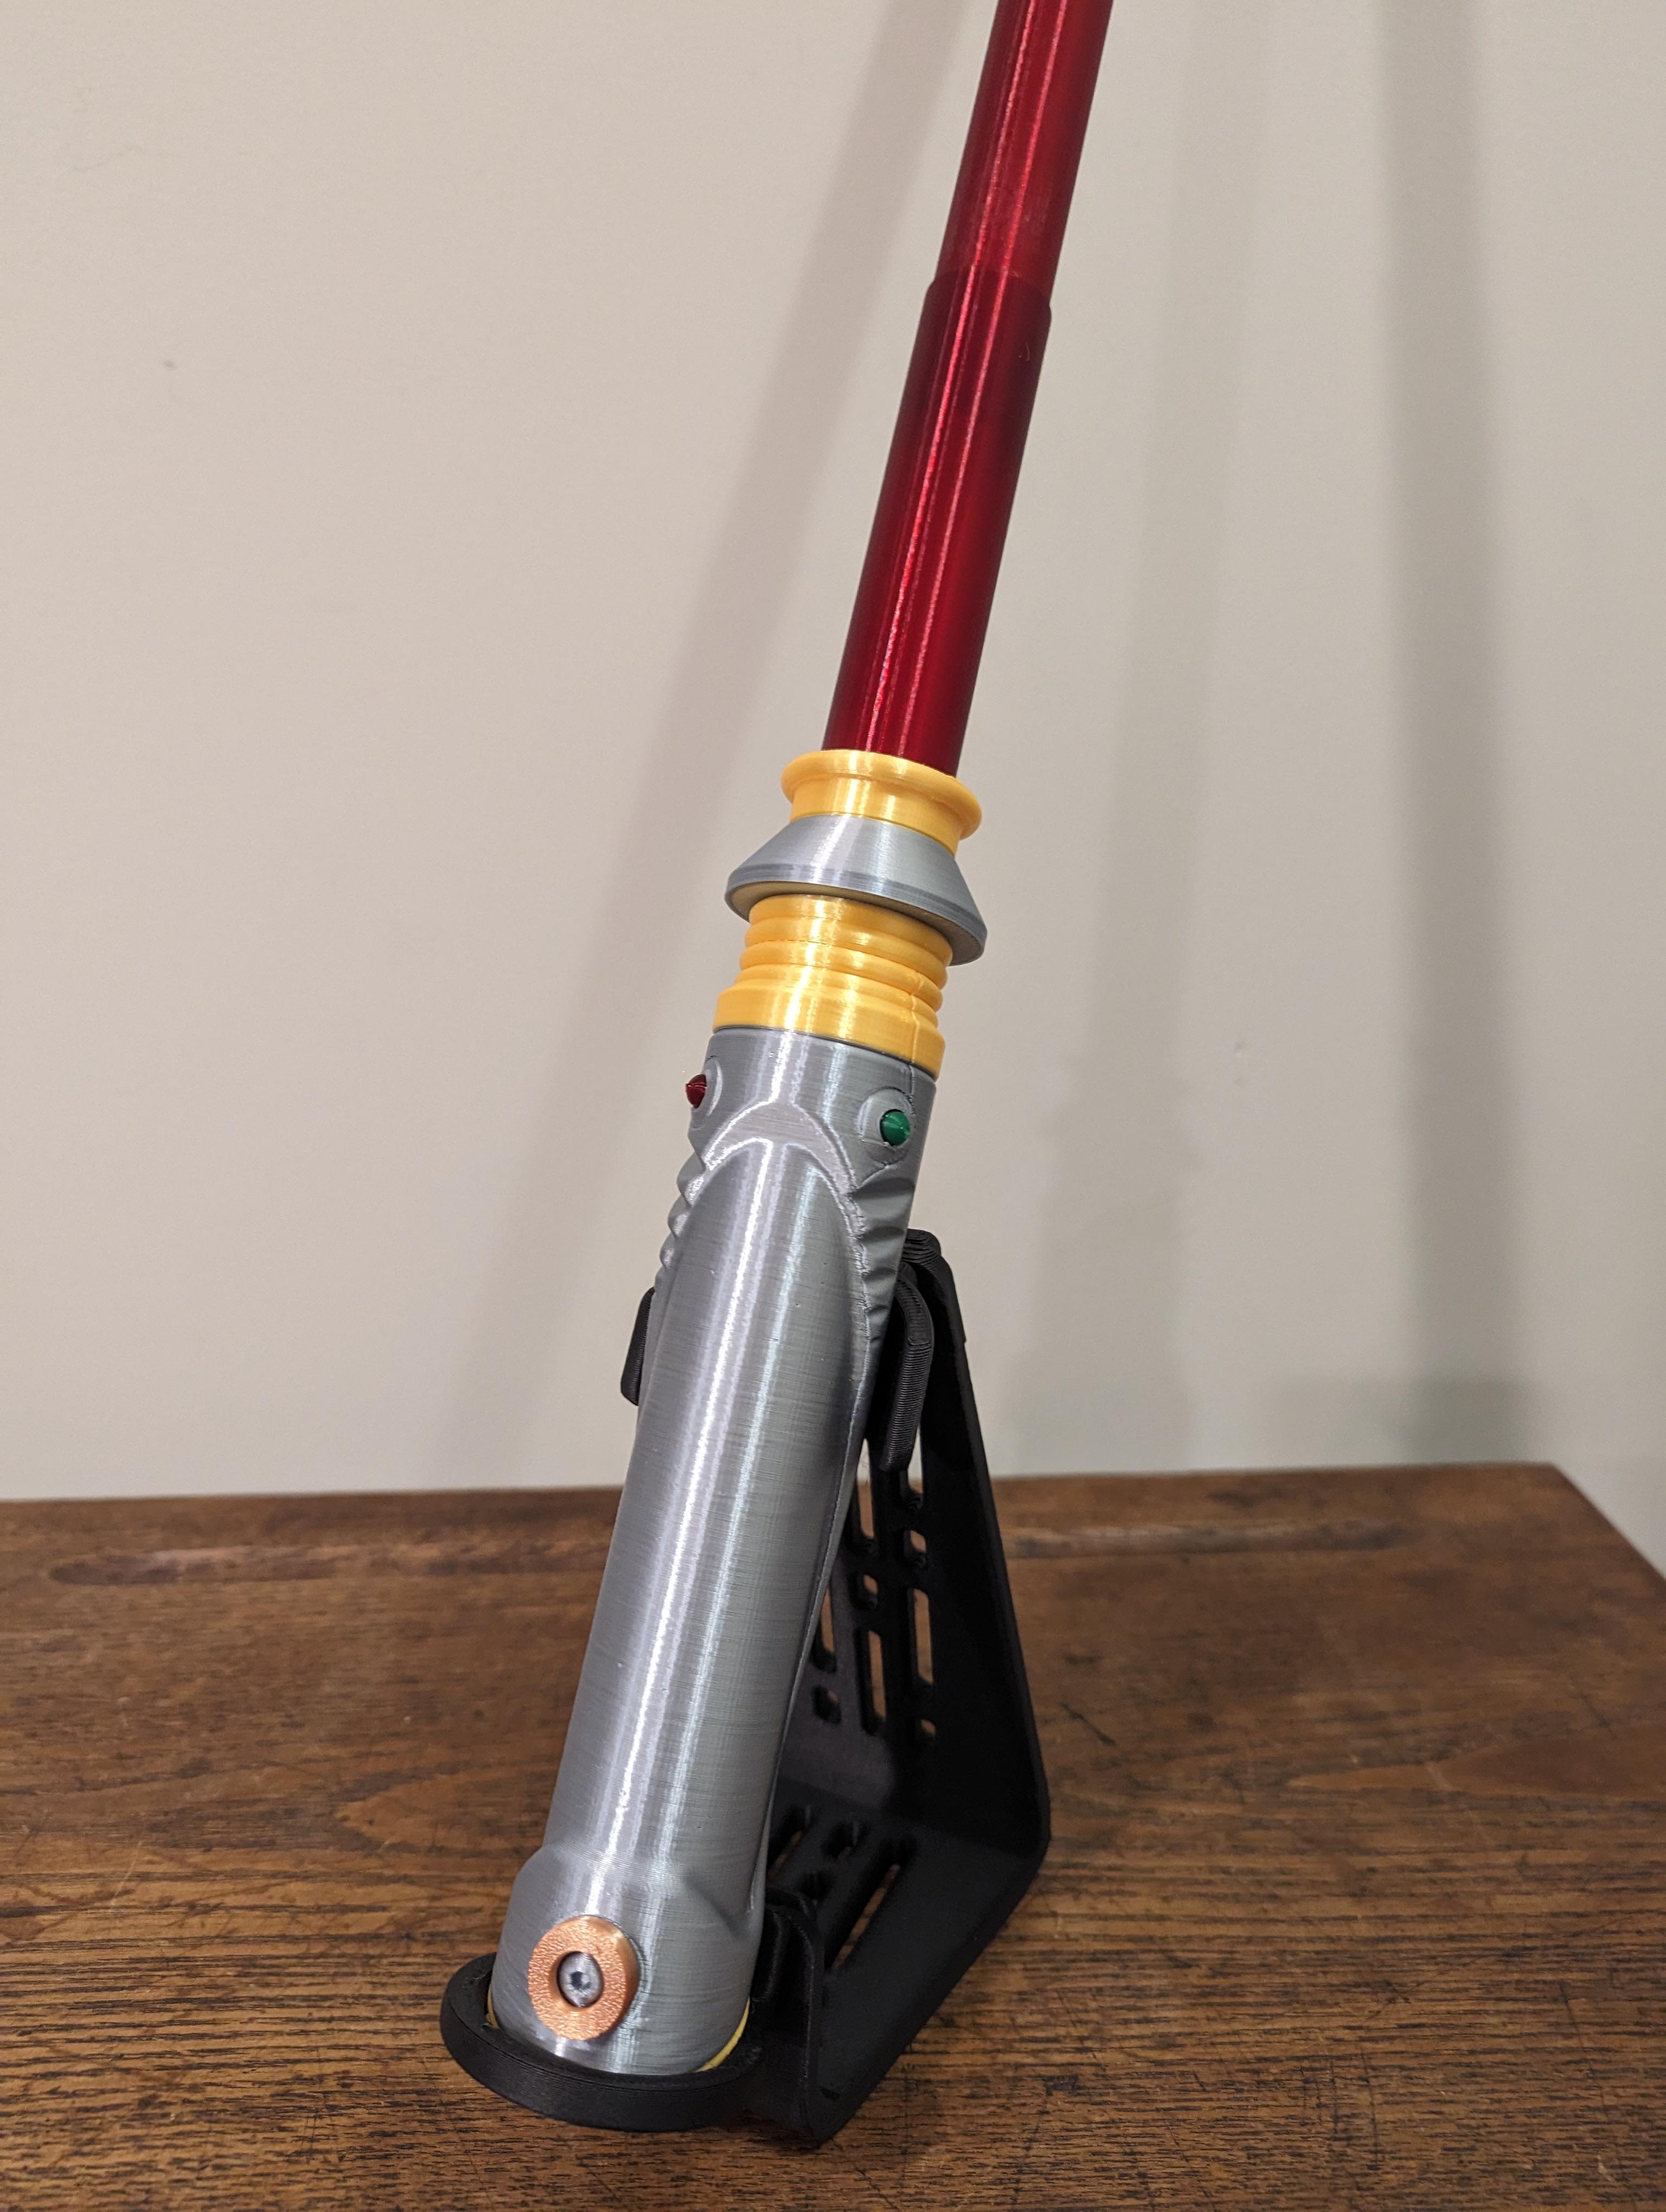 Darth Sidious Multi-Color Lightsaber - @SliceWorx3D Silk Gold, Silver, and Copper.

@Coex3D Translucent Blood Red

@FilamentPM Pearl Green - 3d model